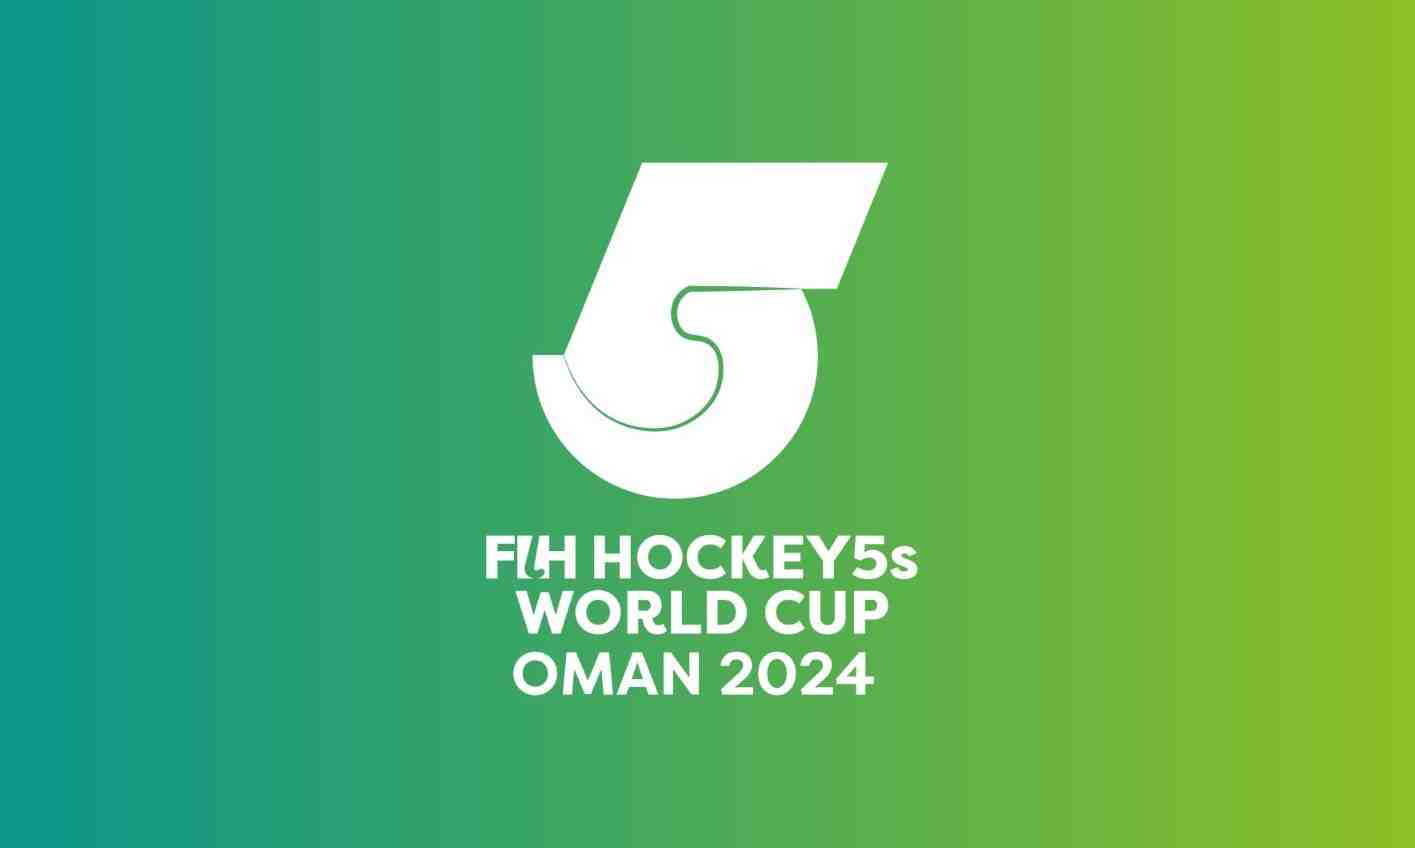 FIH Hockey5s World Cup Oman: pools and match schedule revealed